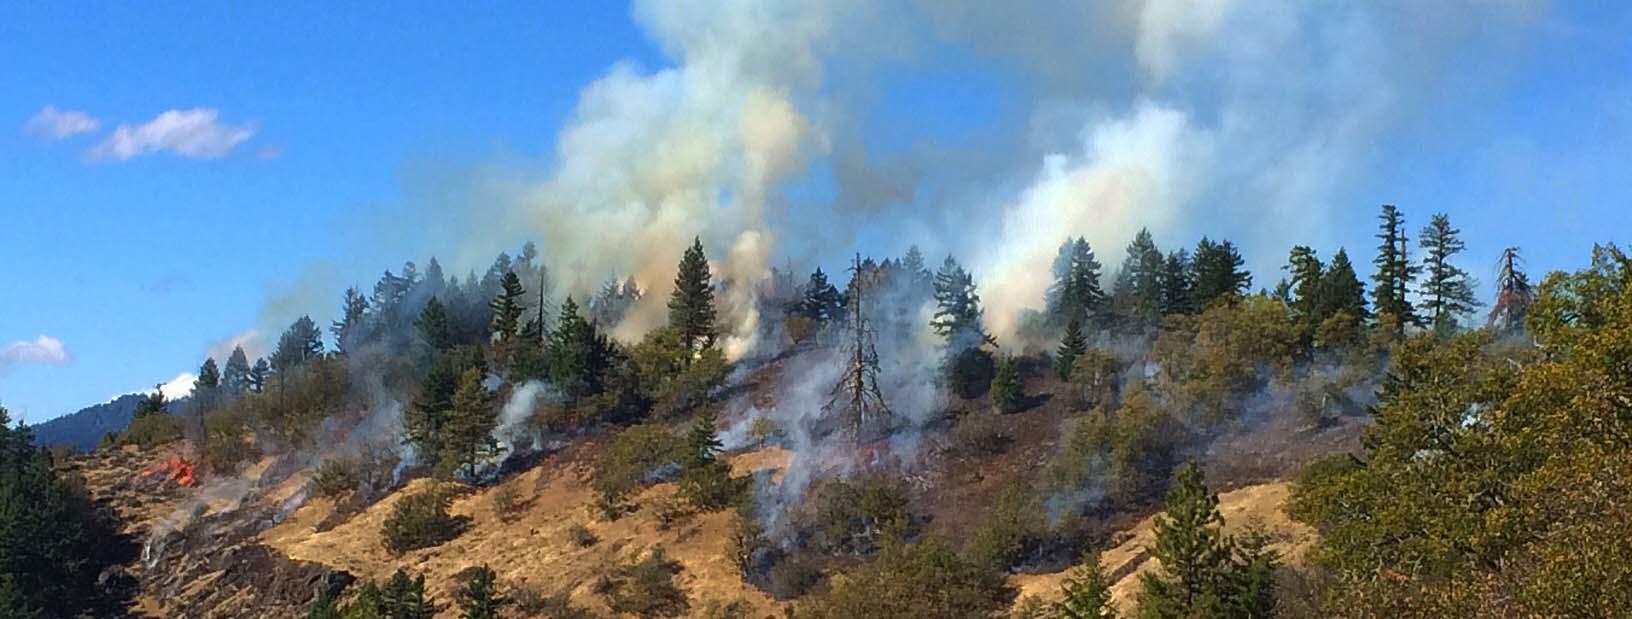 fire along lightly forested ridgeline